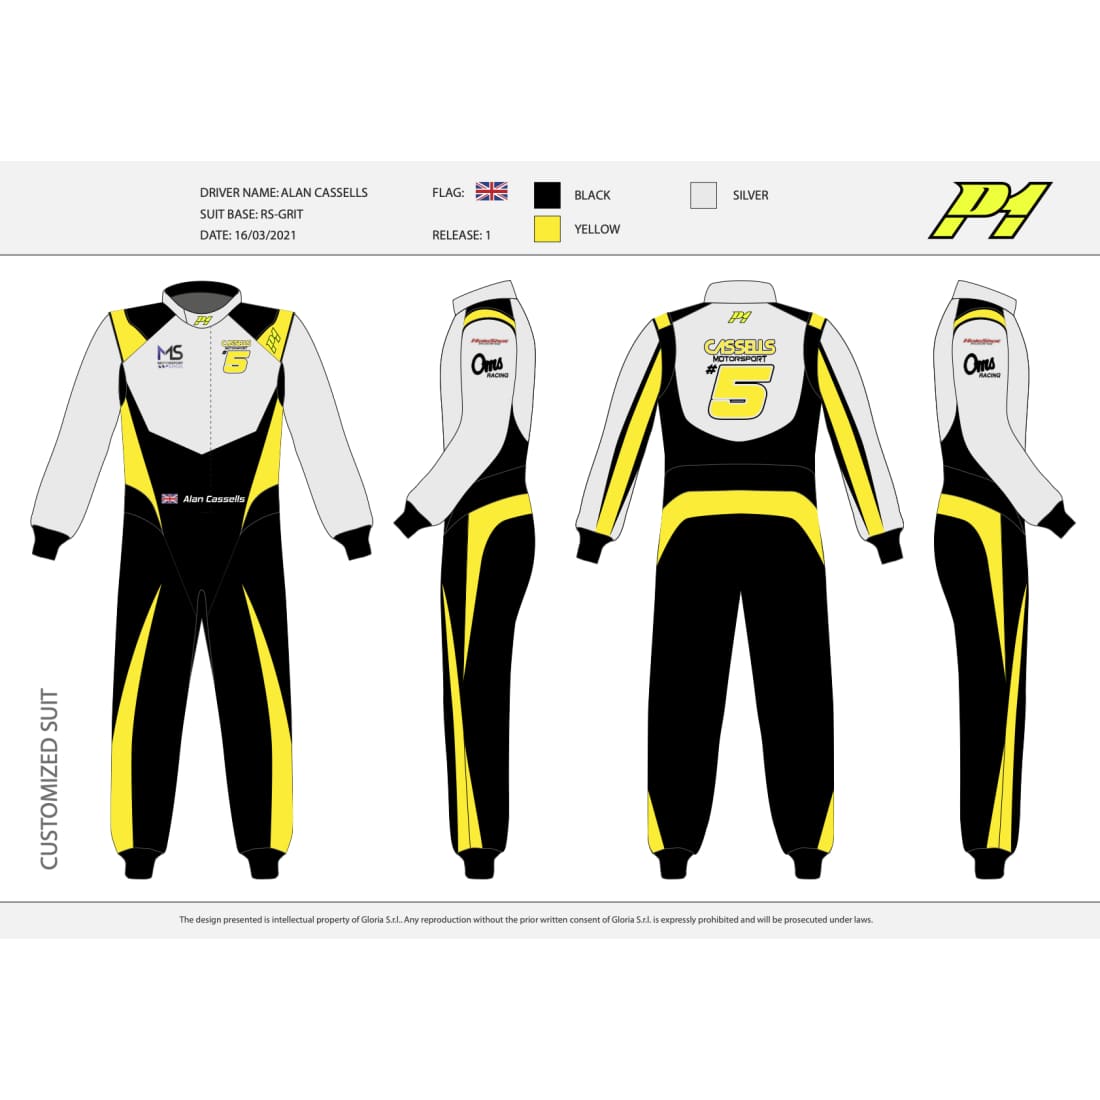 fully customised p1 racesuit and underwear tops